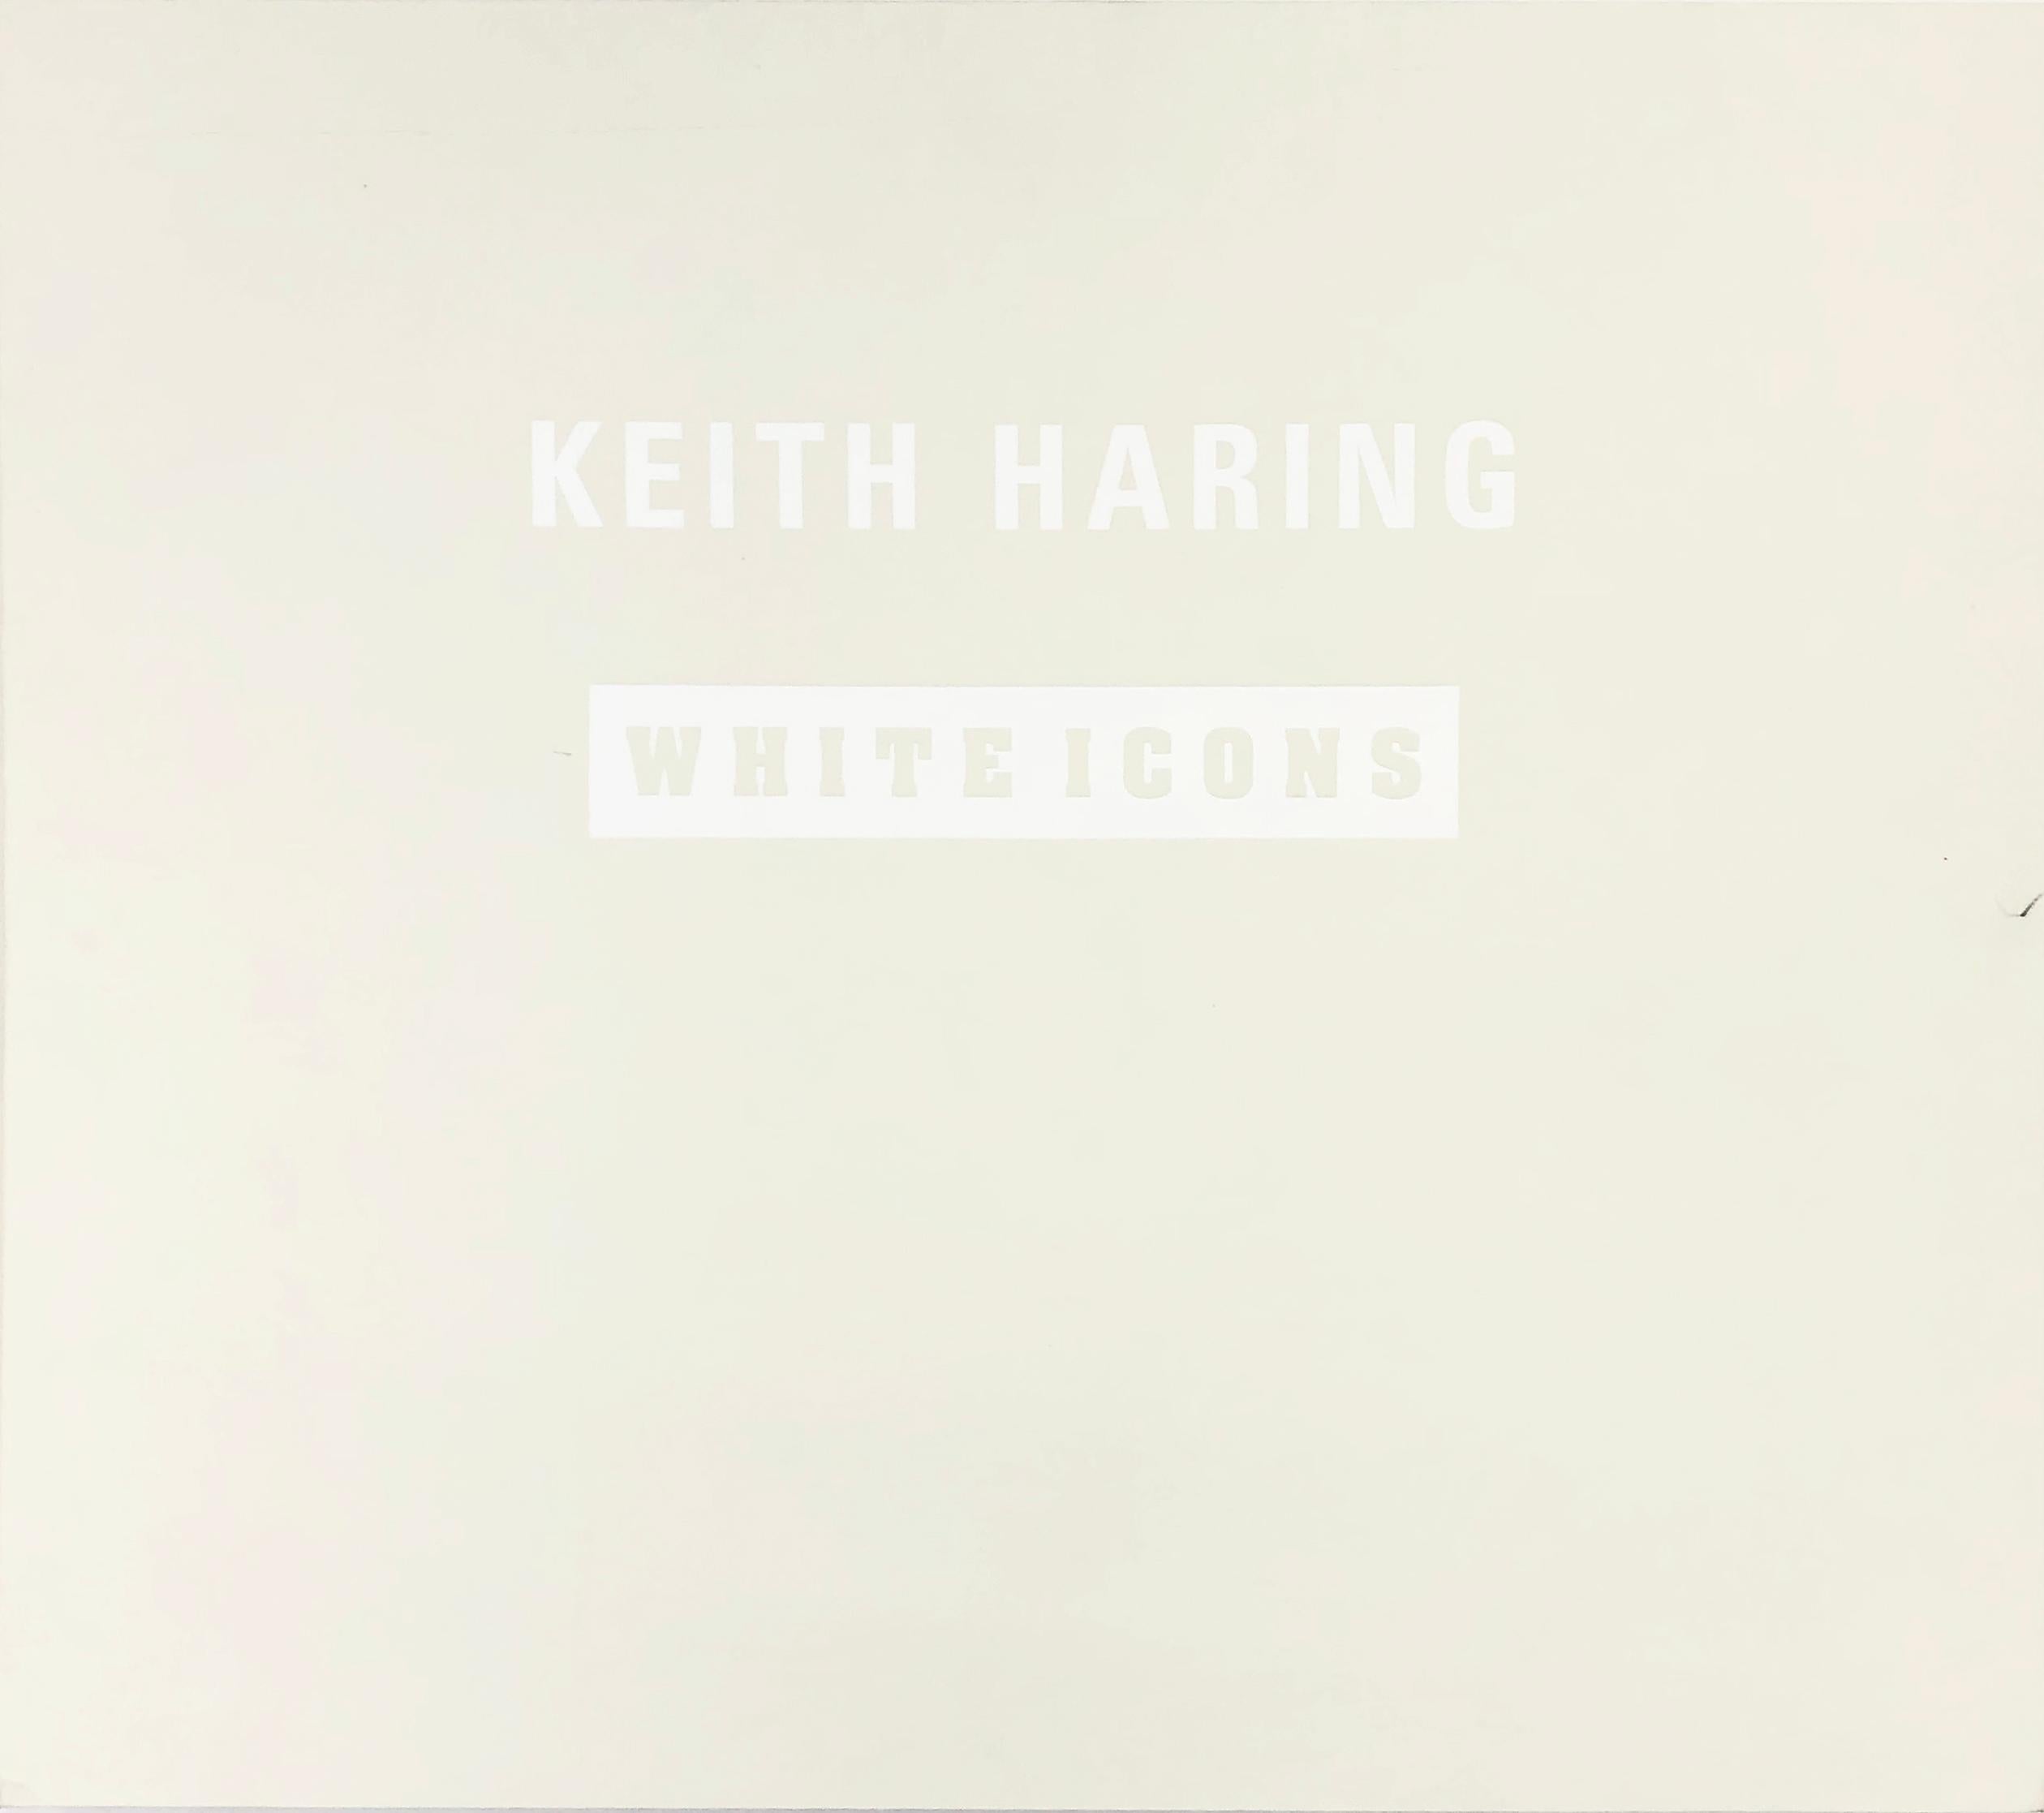 WHITE ICONS (COMPLETE SERIES OF 5) - Print by Keith Haring